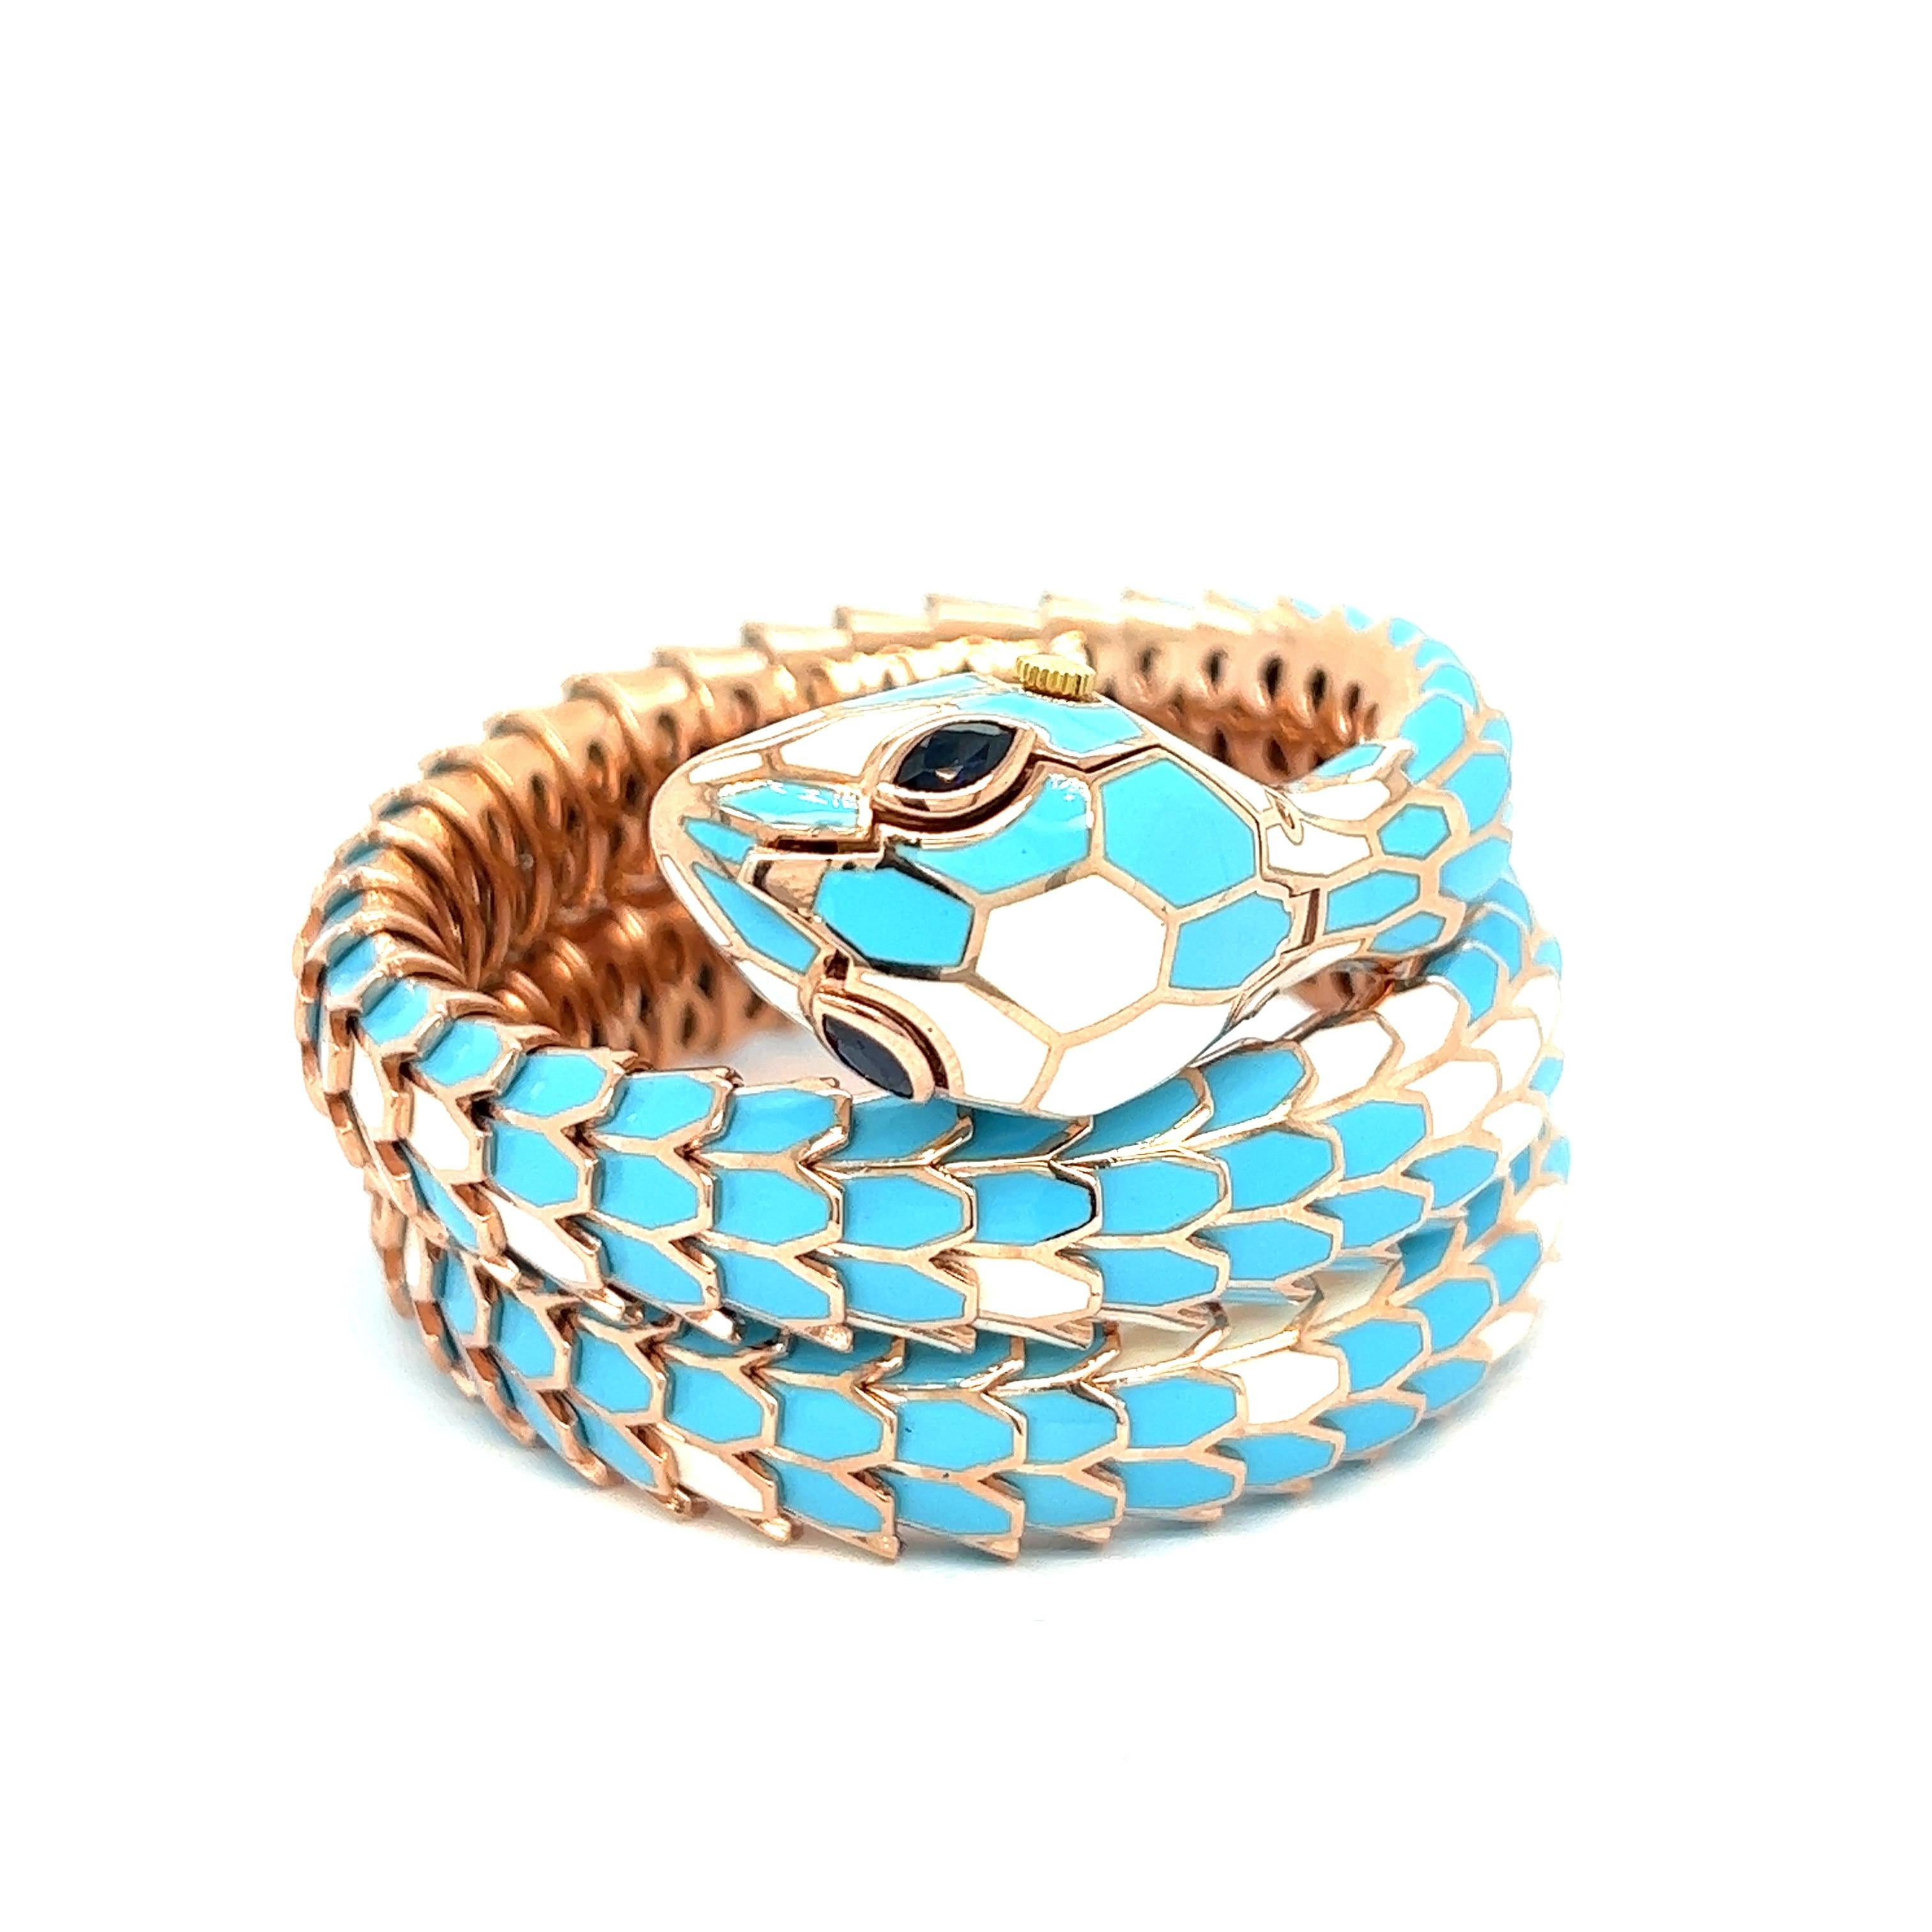 Light blue and white enamel sapphire snake wrap watch bracelet, 3 rows

Marquise-shaped sapphires of 0.55 carats, 18 karat white gold, and silver with a tone of rose gold; marked 750, 925, BEW005RM05M02-0129

Size: inner circumference 6 inches,